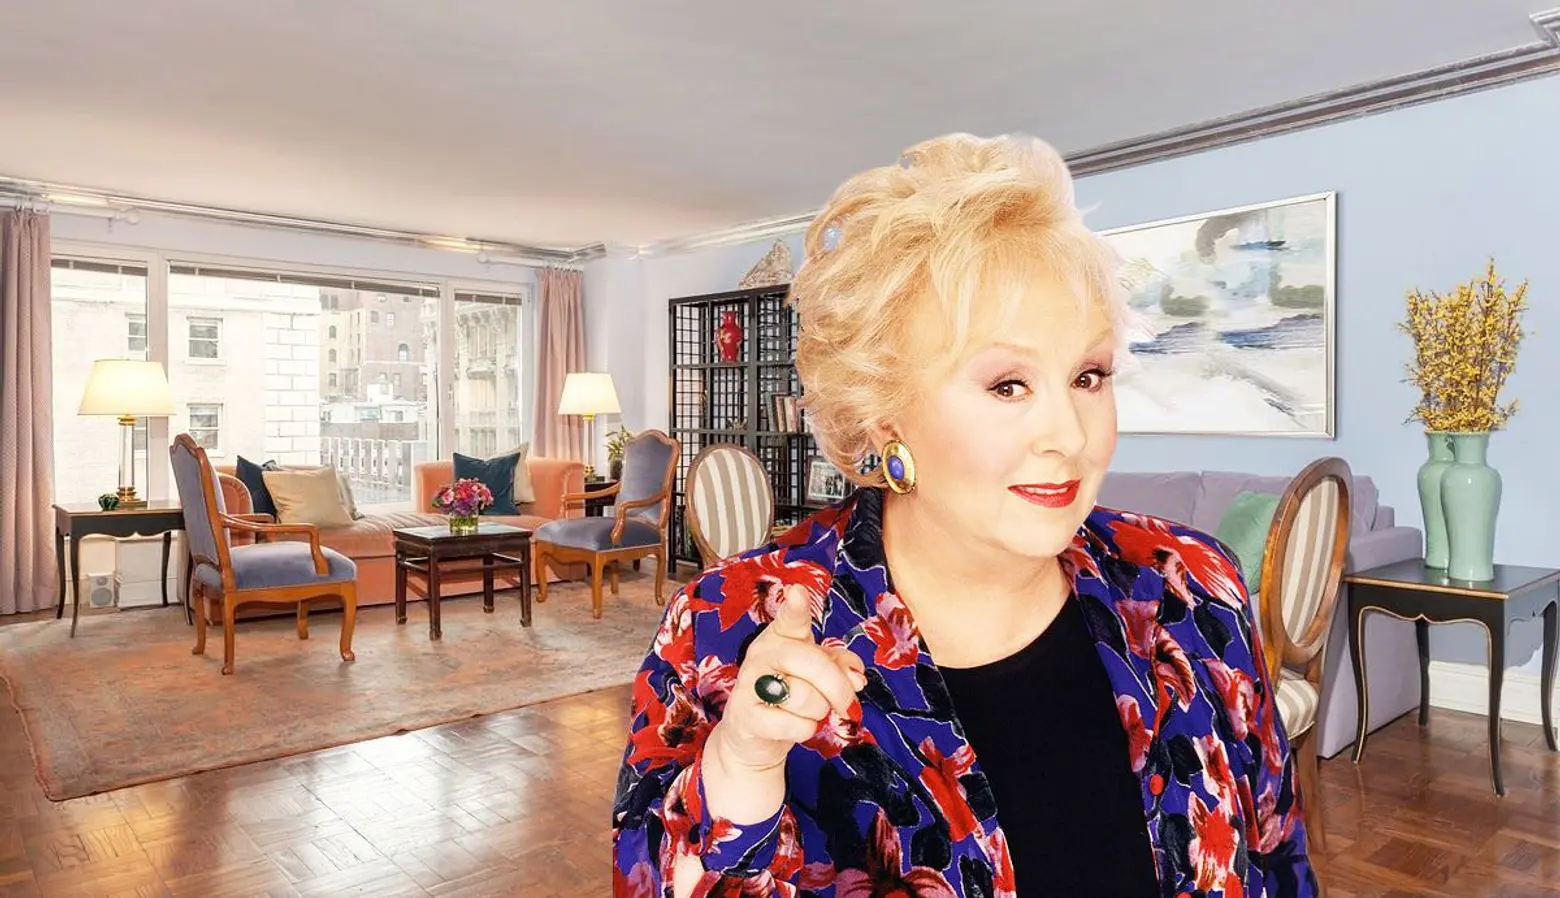 Central Park South co-op of the late Doris Roberts lists for $3.3M